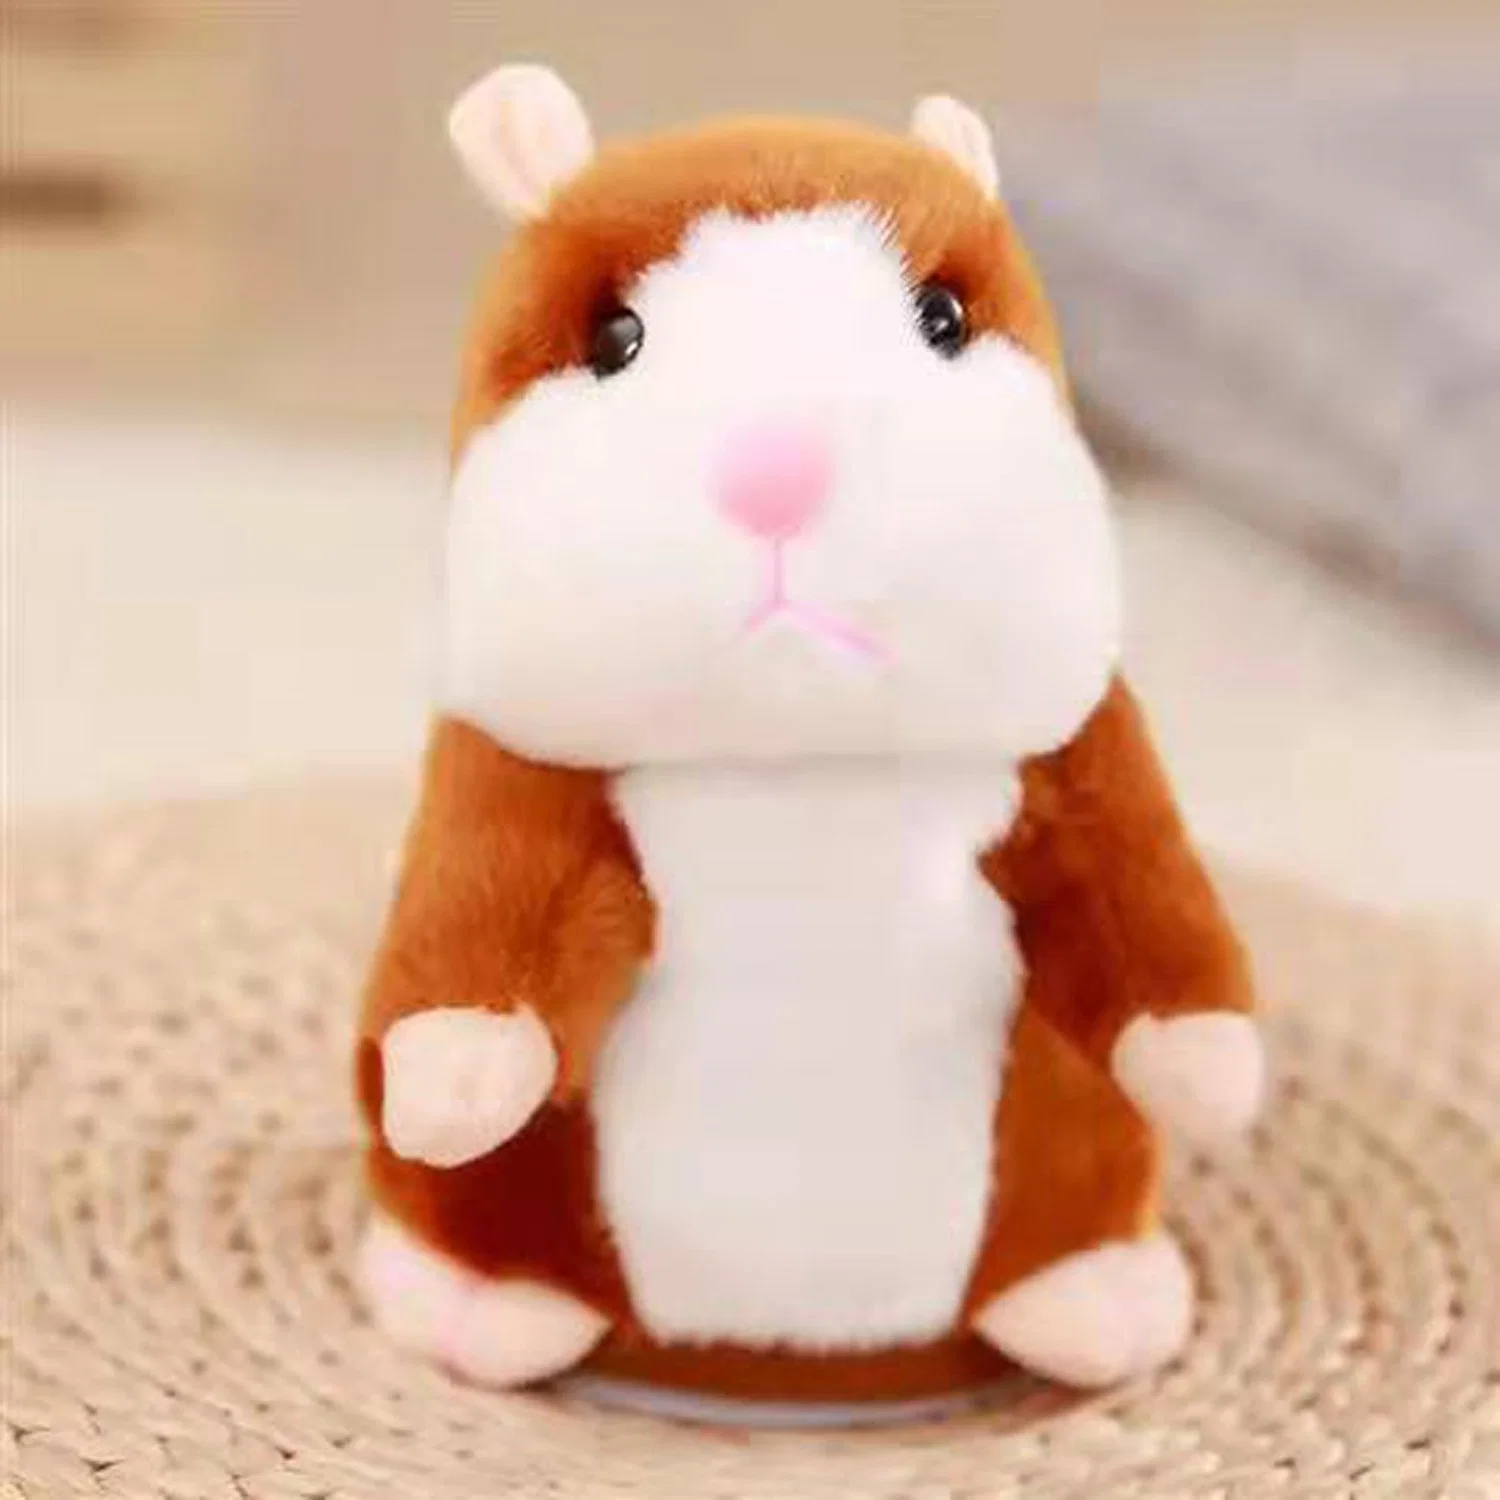 Talking Hamster Interactive Stuffed Animal Toy Cute Sound Effects Talking Plush Toys with Repeats Your Said Voice Best Buddy for Kids Gift